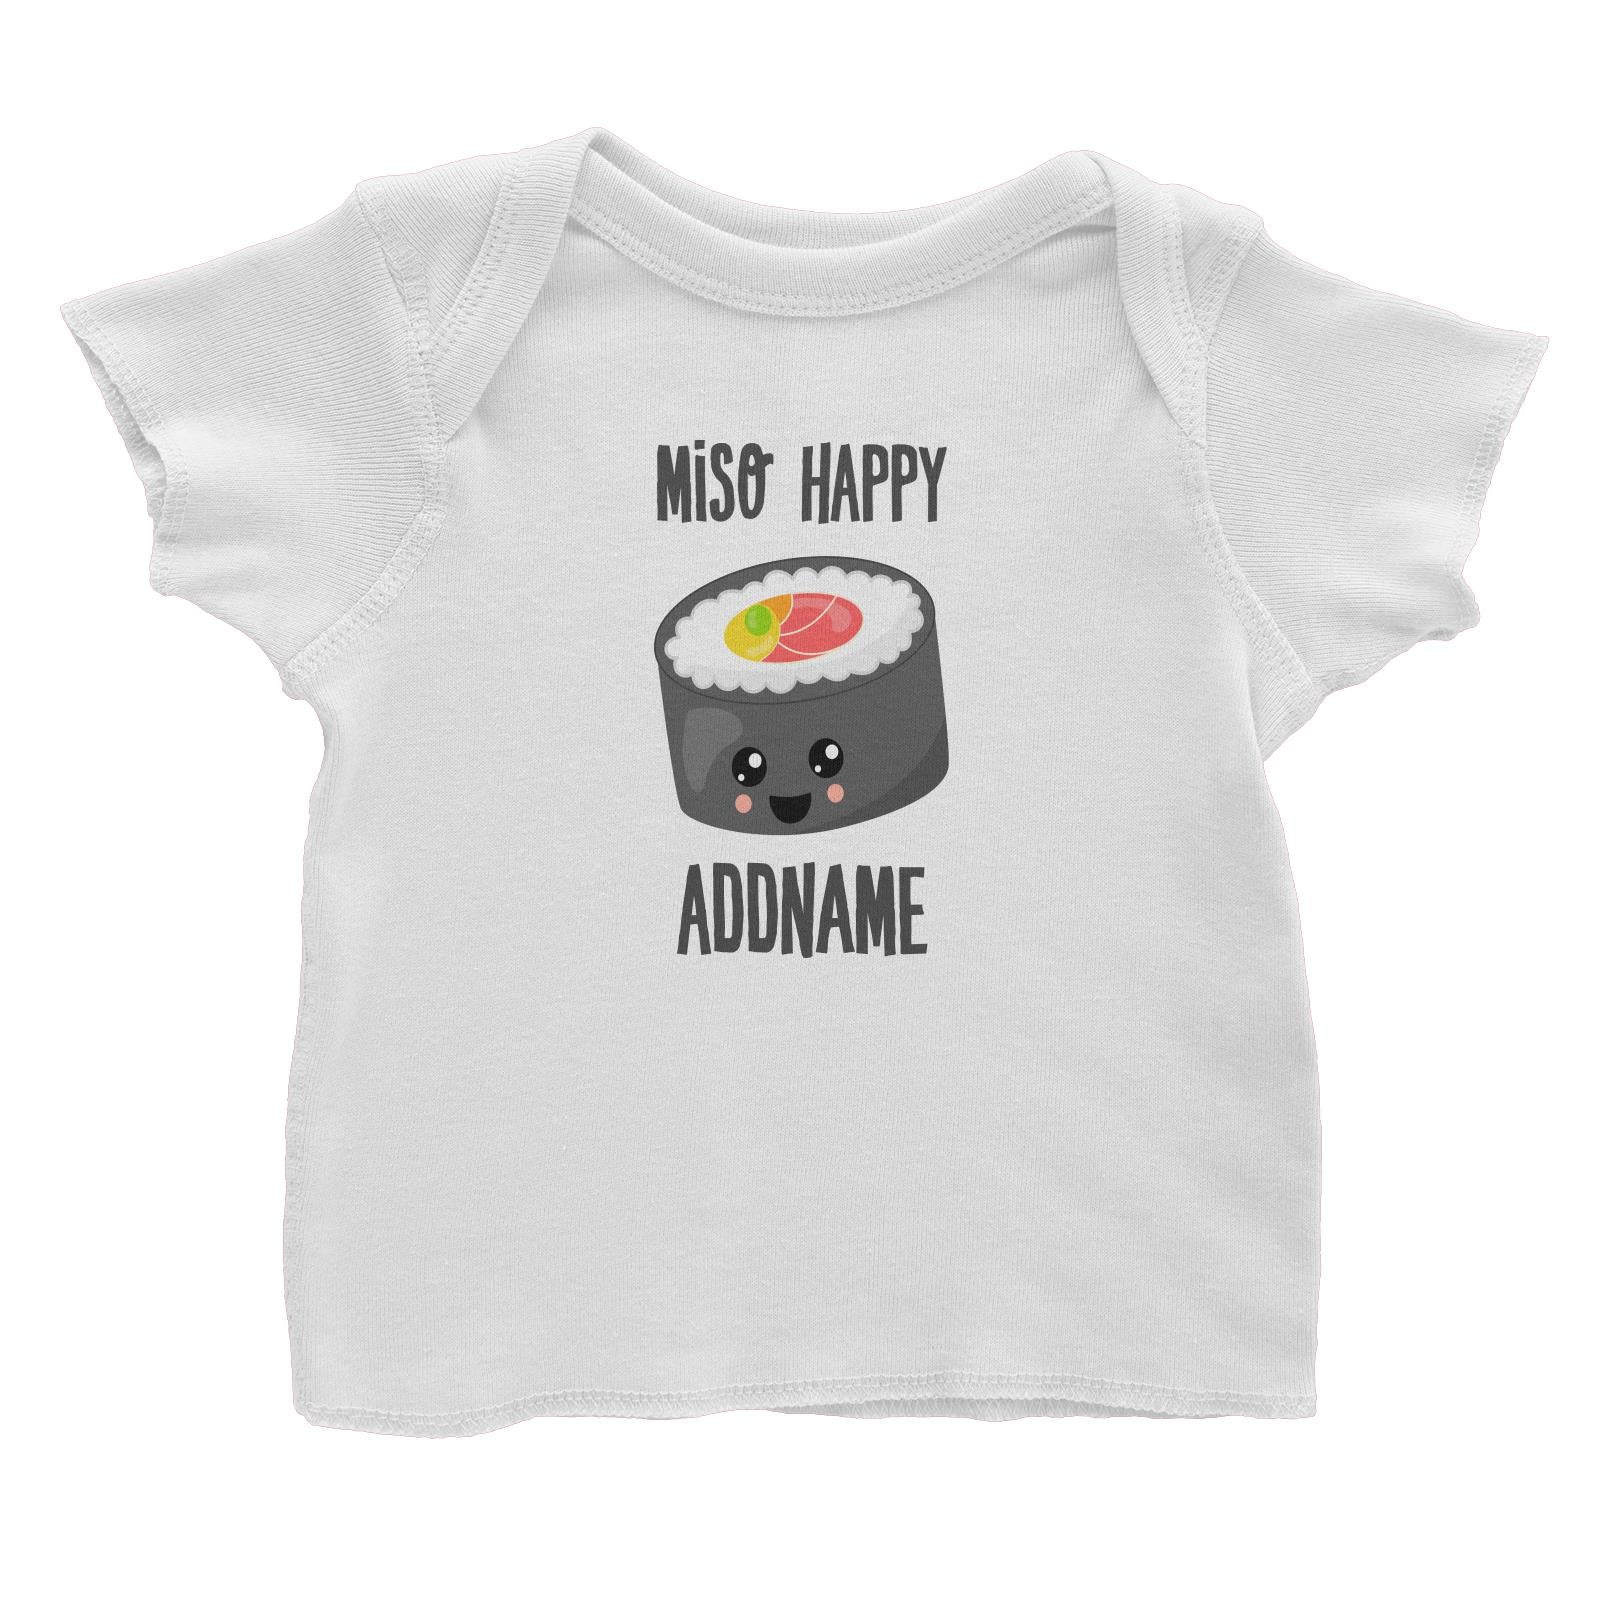 Miso Happy Sushi Circle Roll Addname Baby T-Shirt